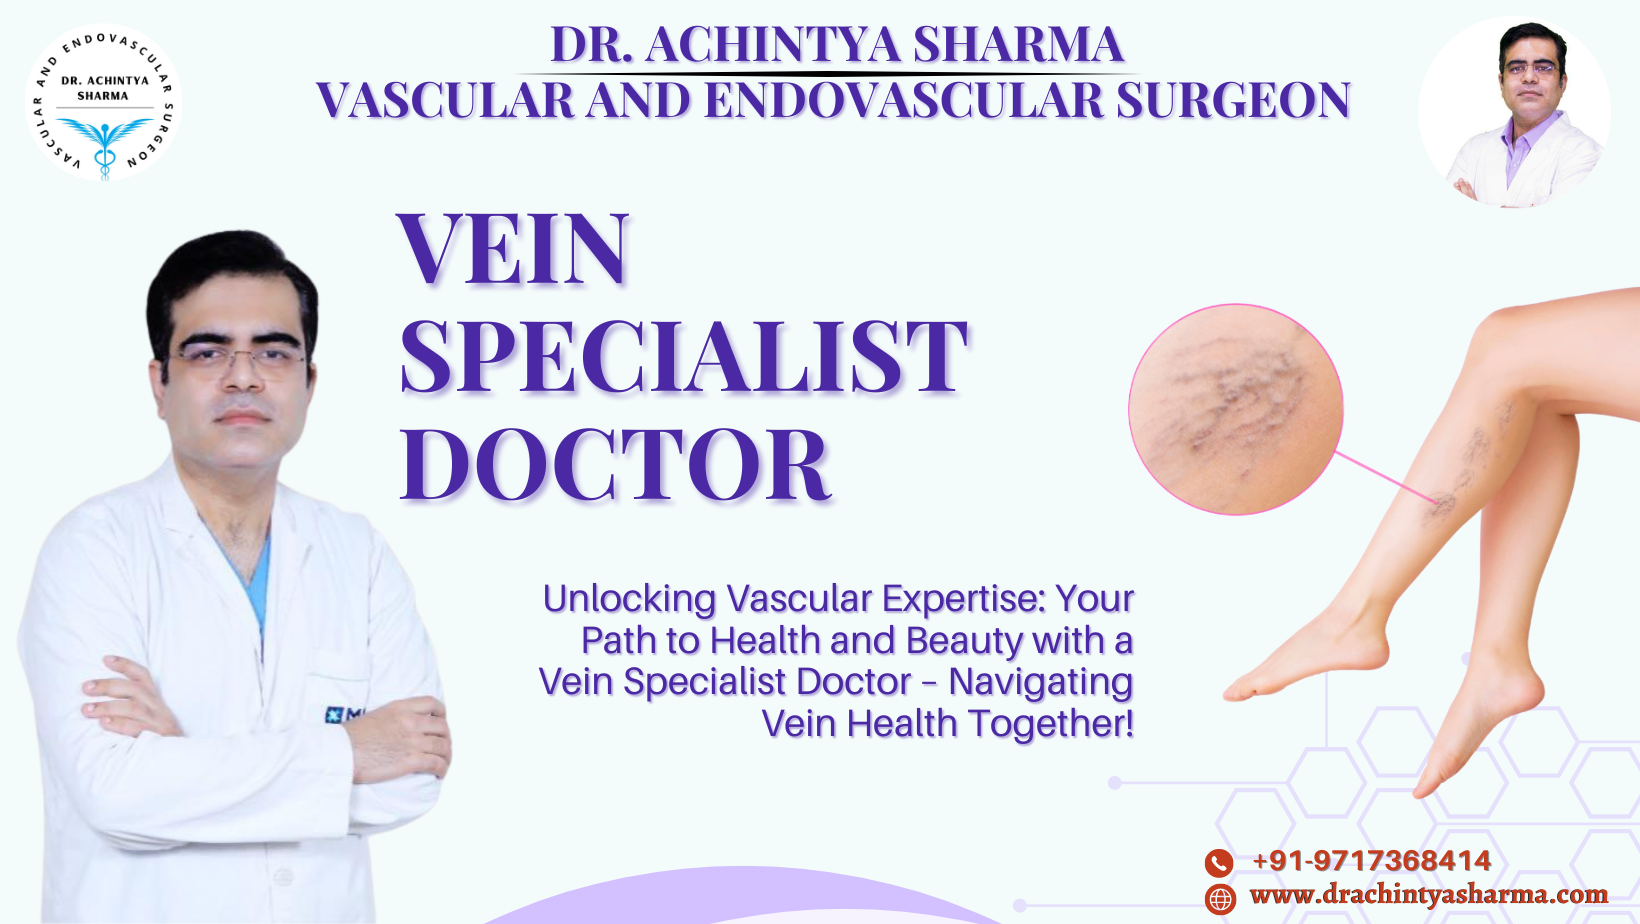 Vascular Health: The Expertise of a Vein Specialist Doctor